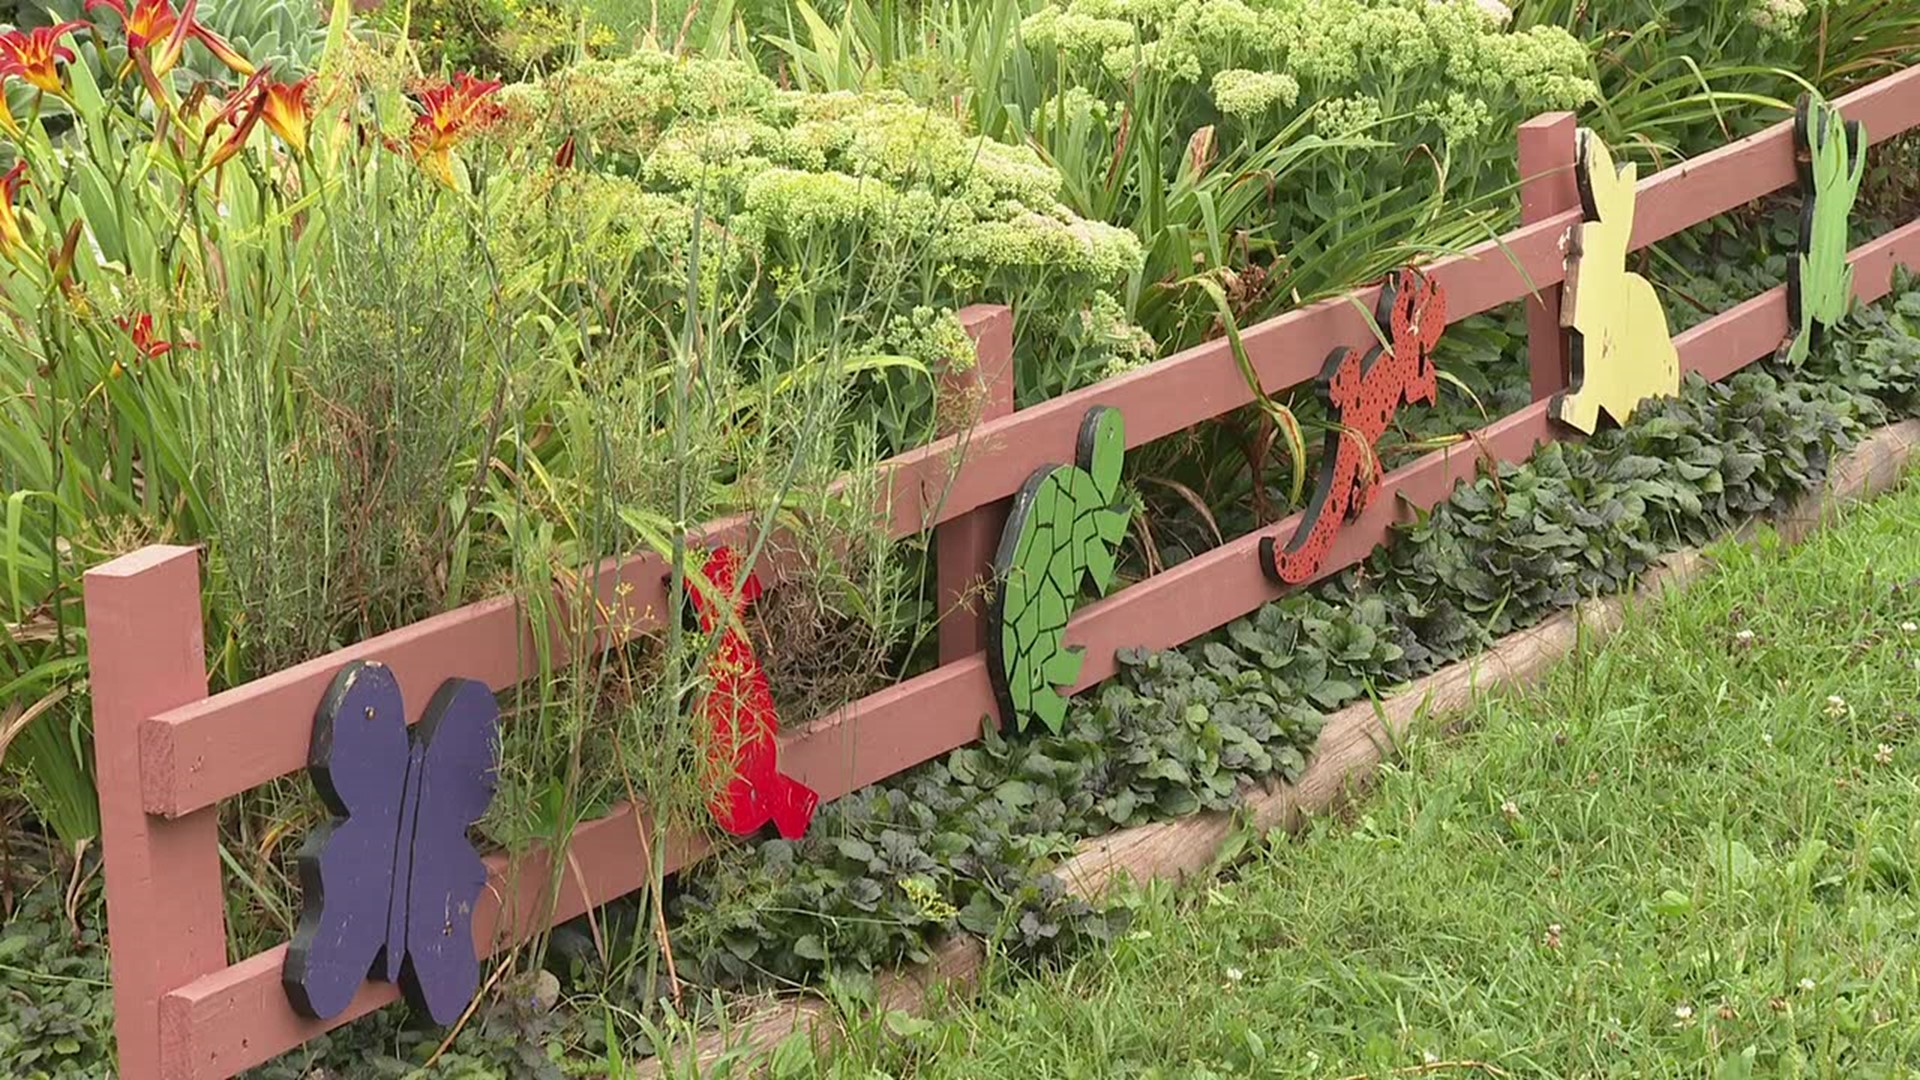 A special garden in Schuylkill County is a treat for all the senses, especially the taste buds. The project has now received a national award.